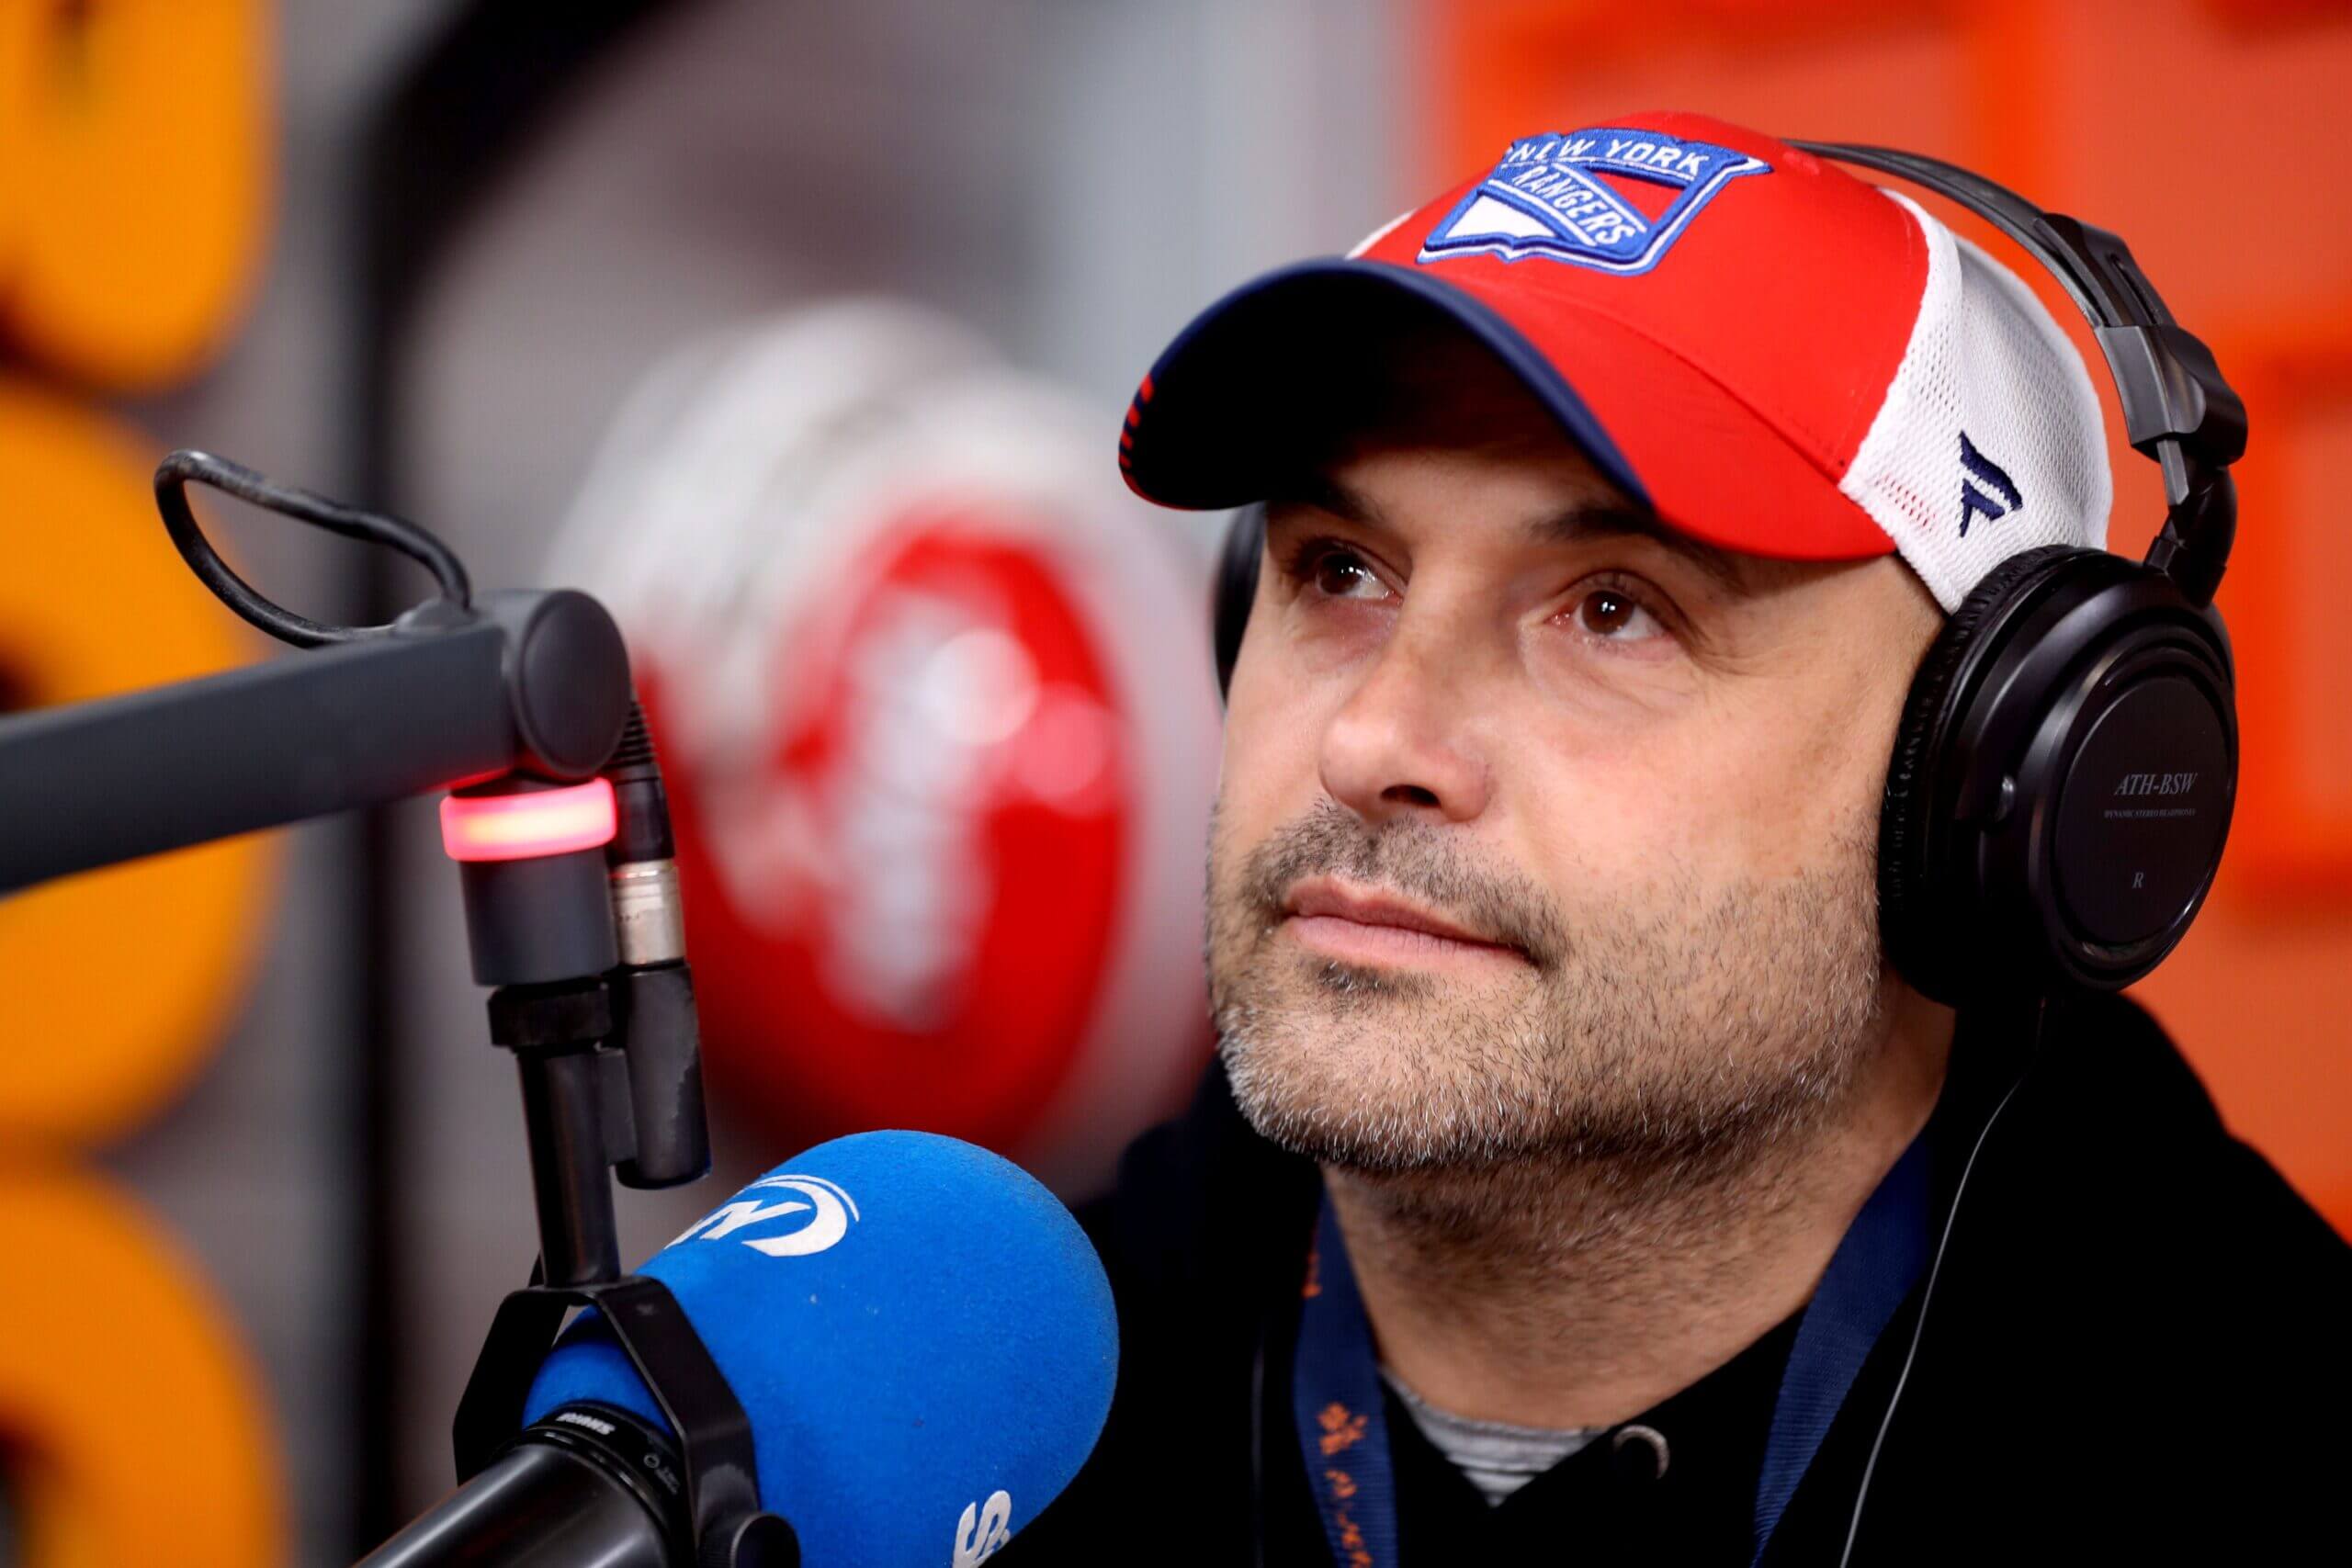 WFAN taps Craig Carton to call 3 Yankees games in August